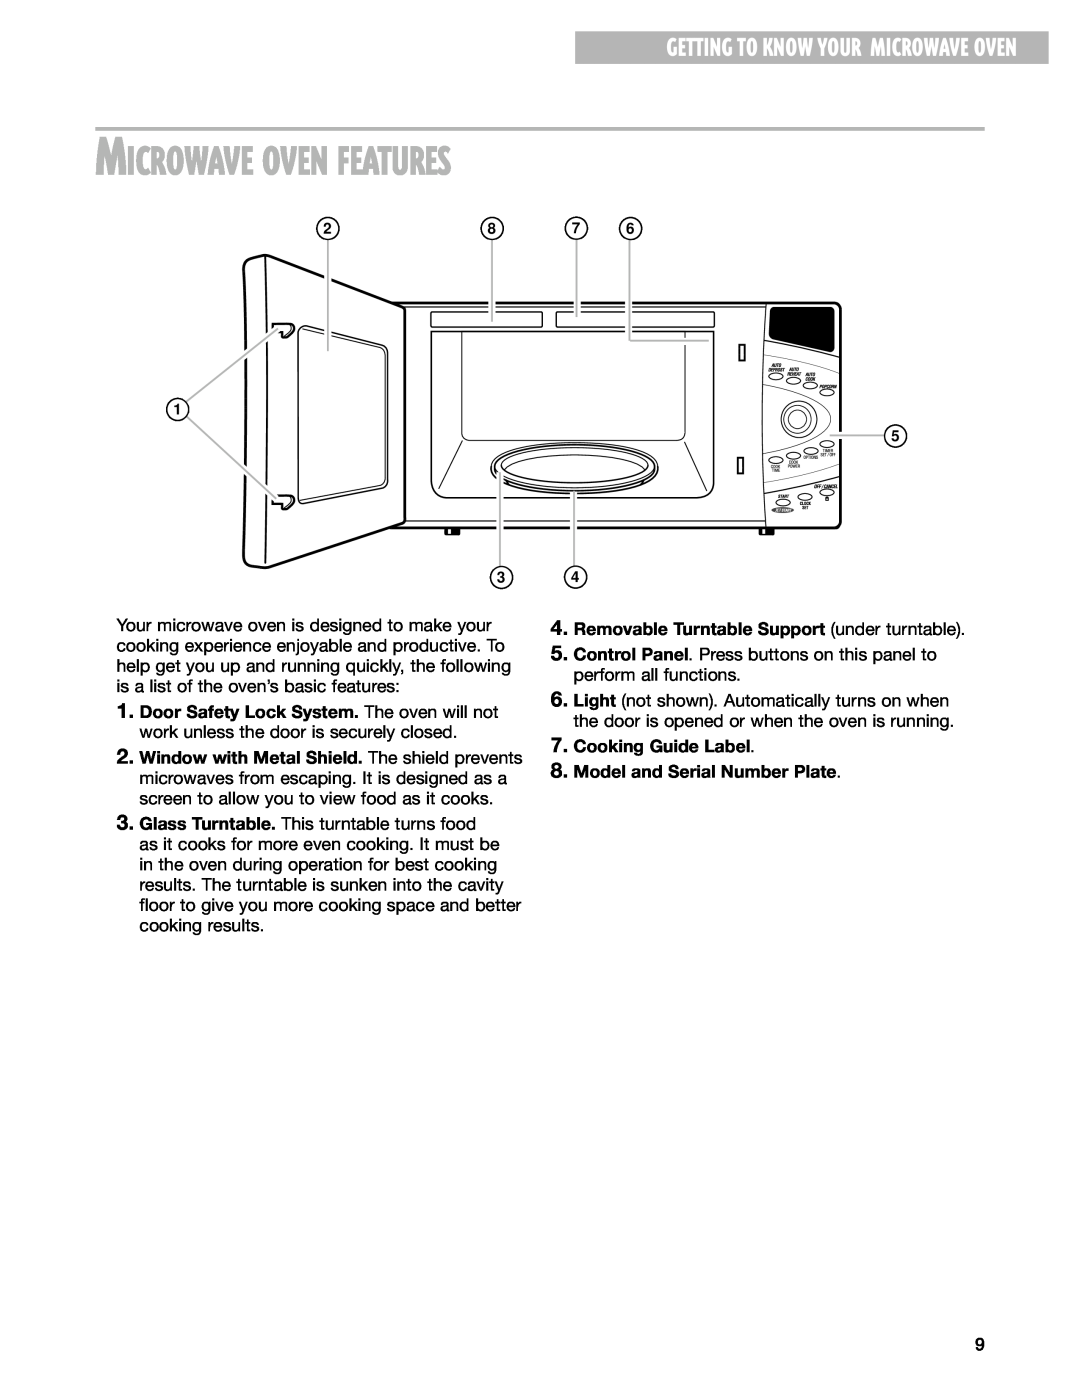 Whirlpool MT3130SH, MT3100SH installation instructions Microwave Oven Features, Getting To Know Your Microwave Oven 